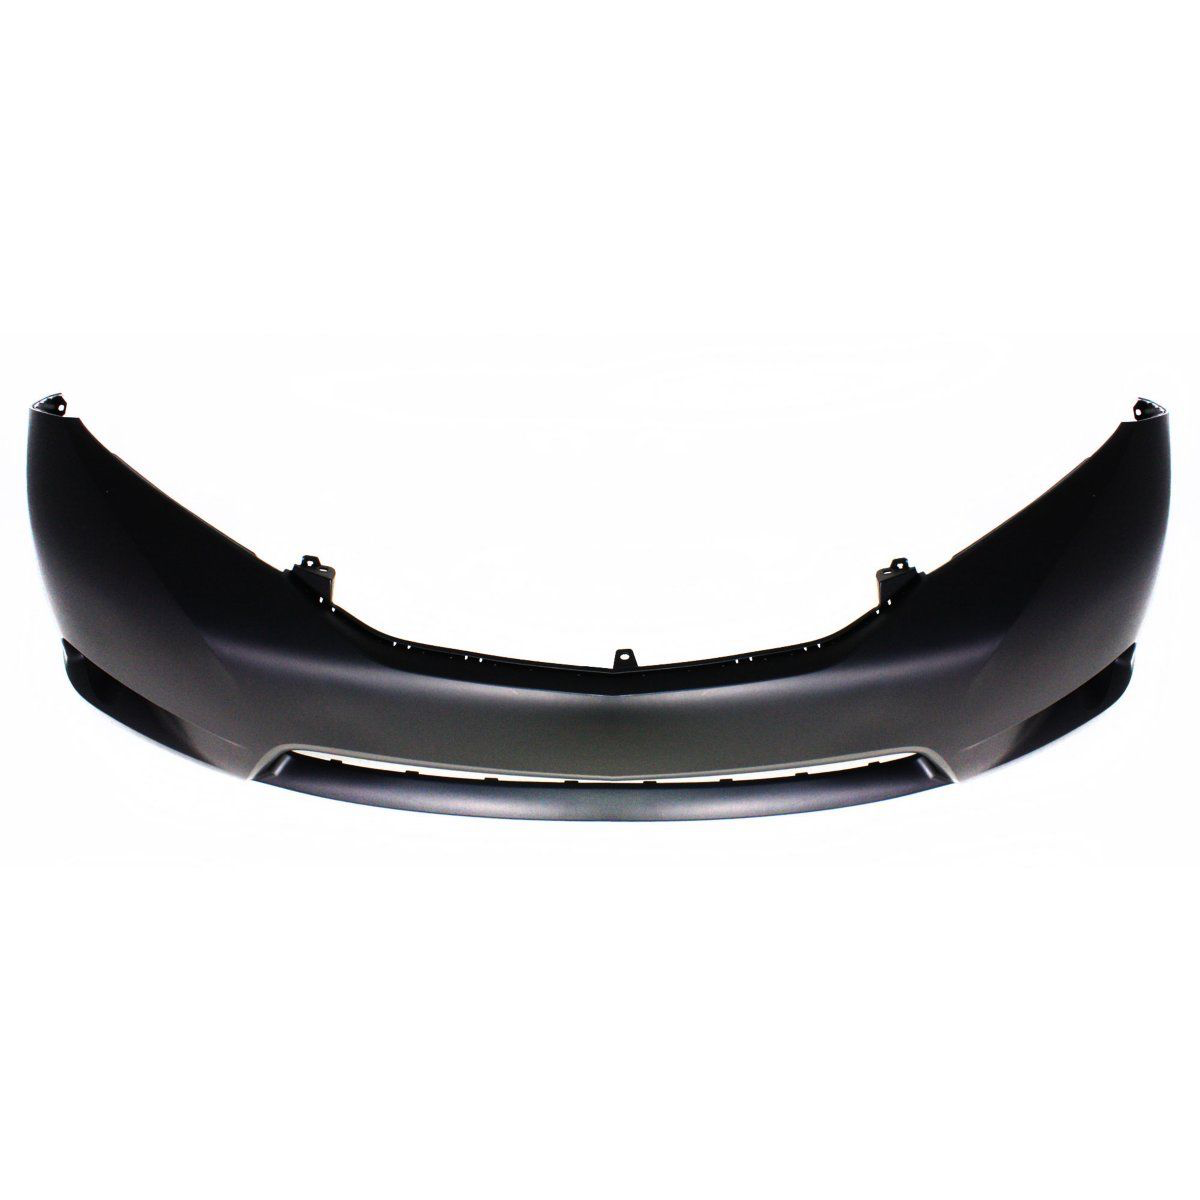 2011-2015 TOYOTA SIENNA Front Bumper Cover BASE|LE|XLE  w/o Park Assist Sensors Painted to Match